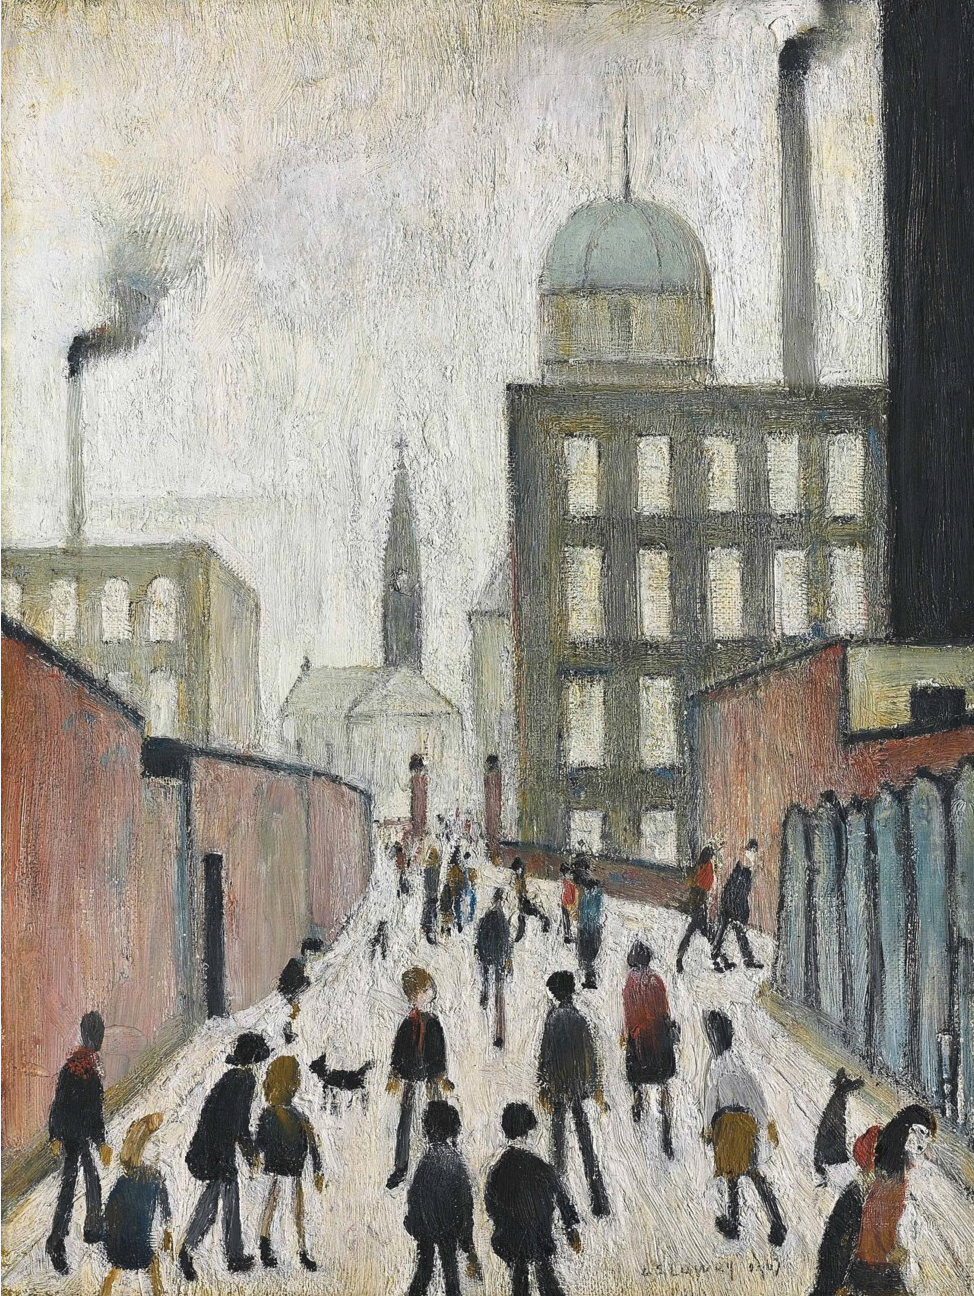 Mrs Swindells' Picture; Figures in a Street (1967) by Laurence Stephen Lowry (1887 - 1976), English artist.